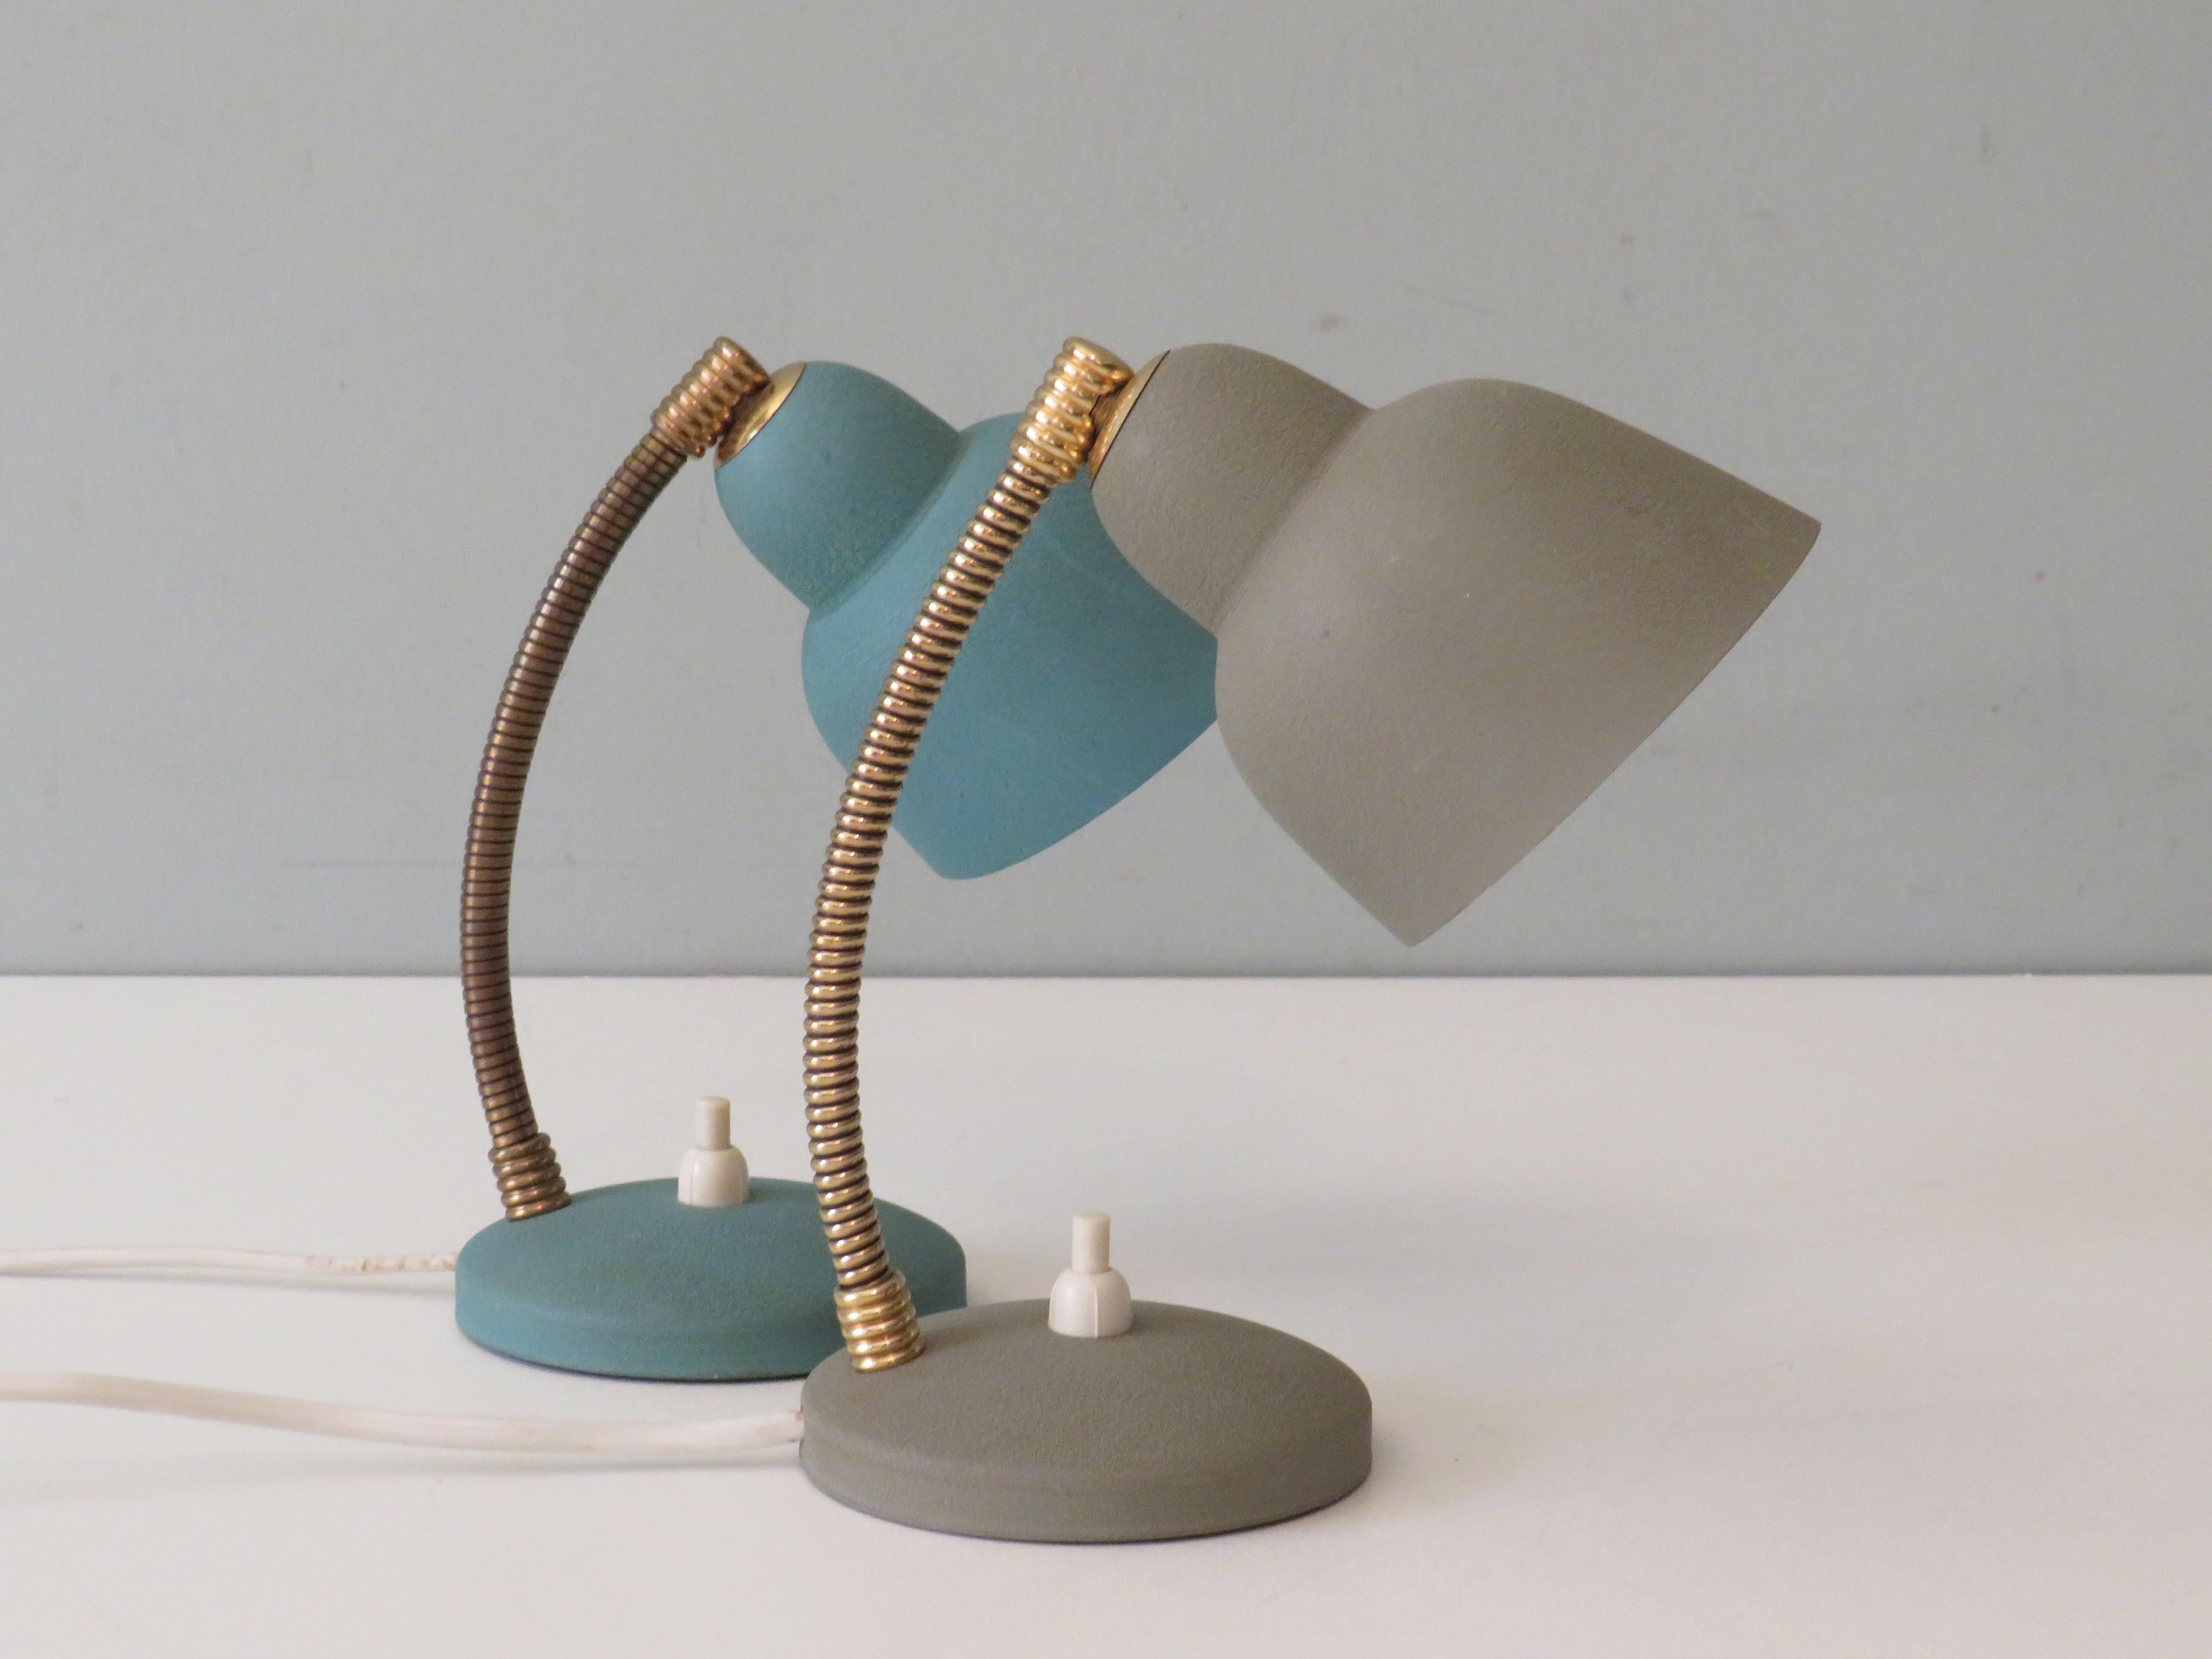 Mid-Century Modern 2 Desk Lamps - Bedside Lamps from Aluminor, France 1950